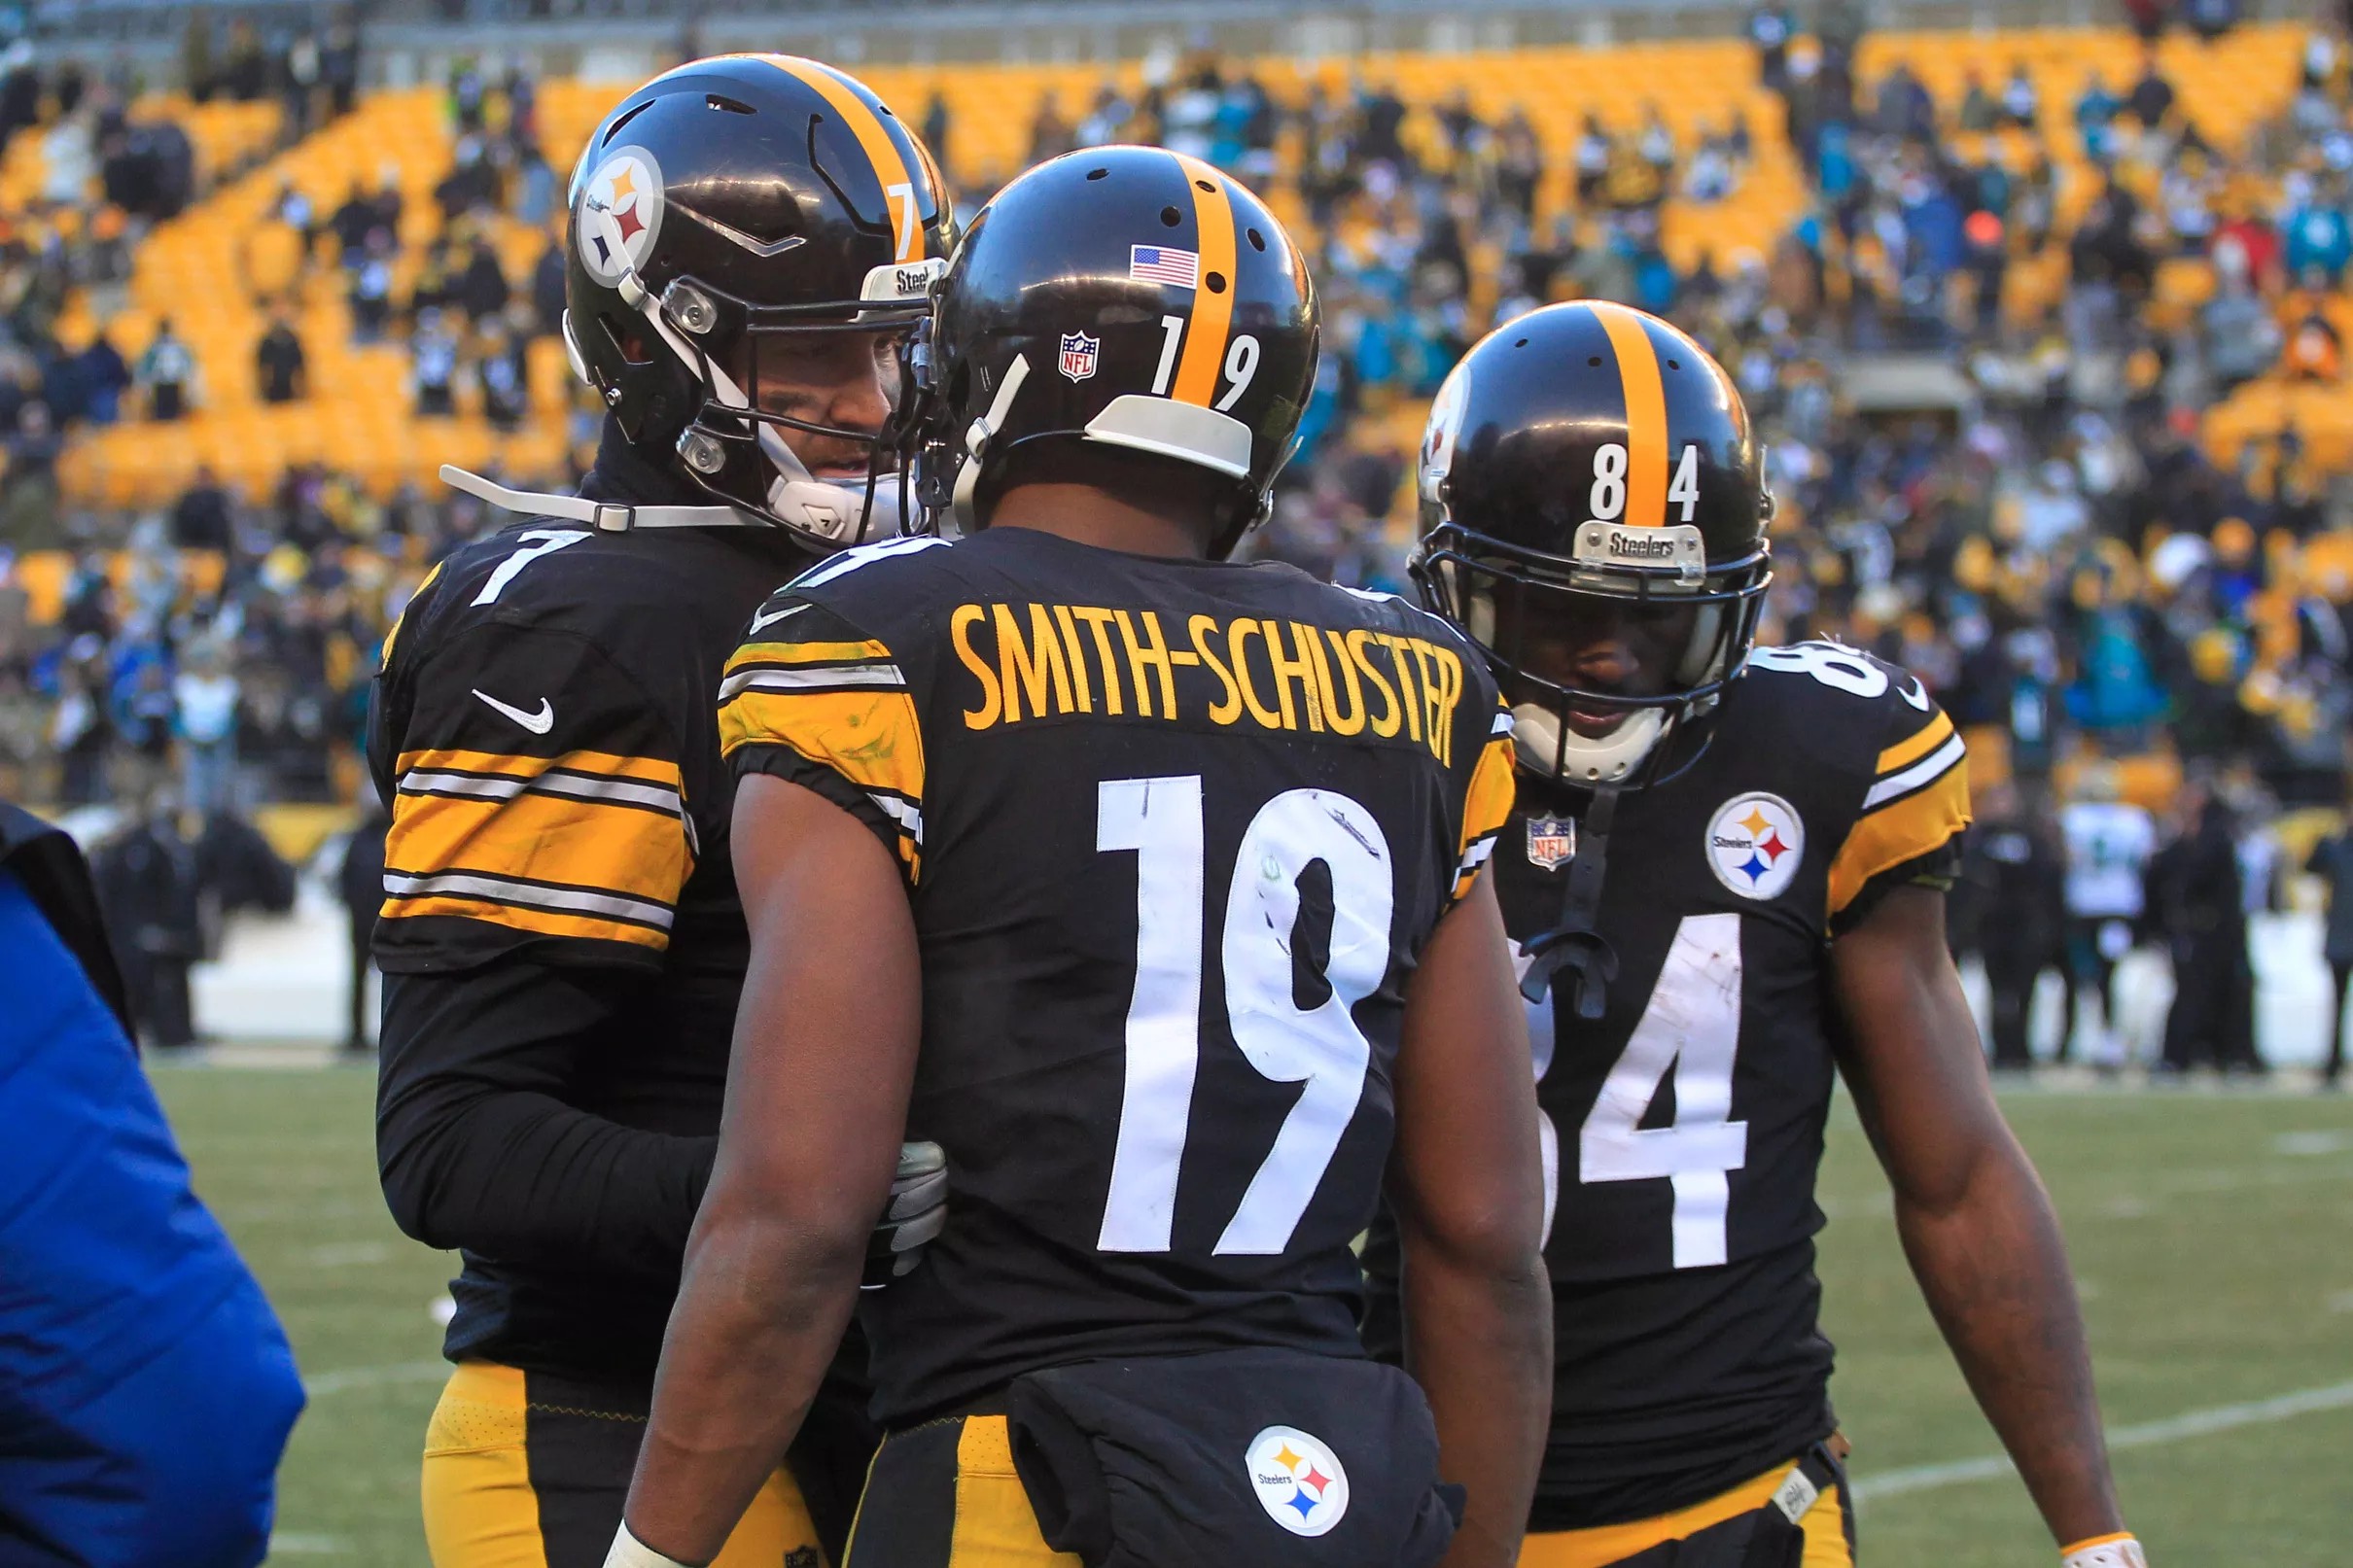 The Pittsburgh Steelers are back in their usual spot of No. 3 on the